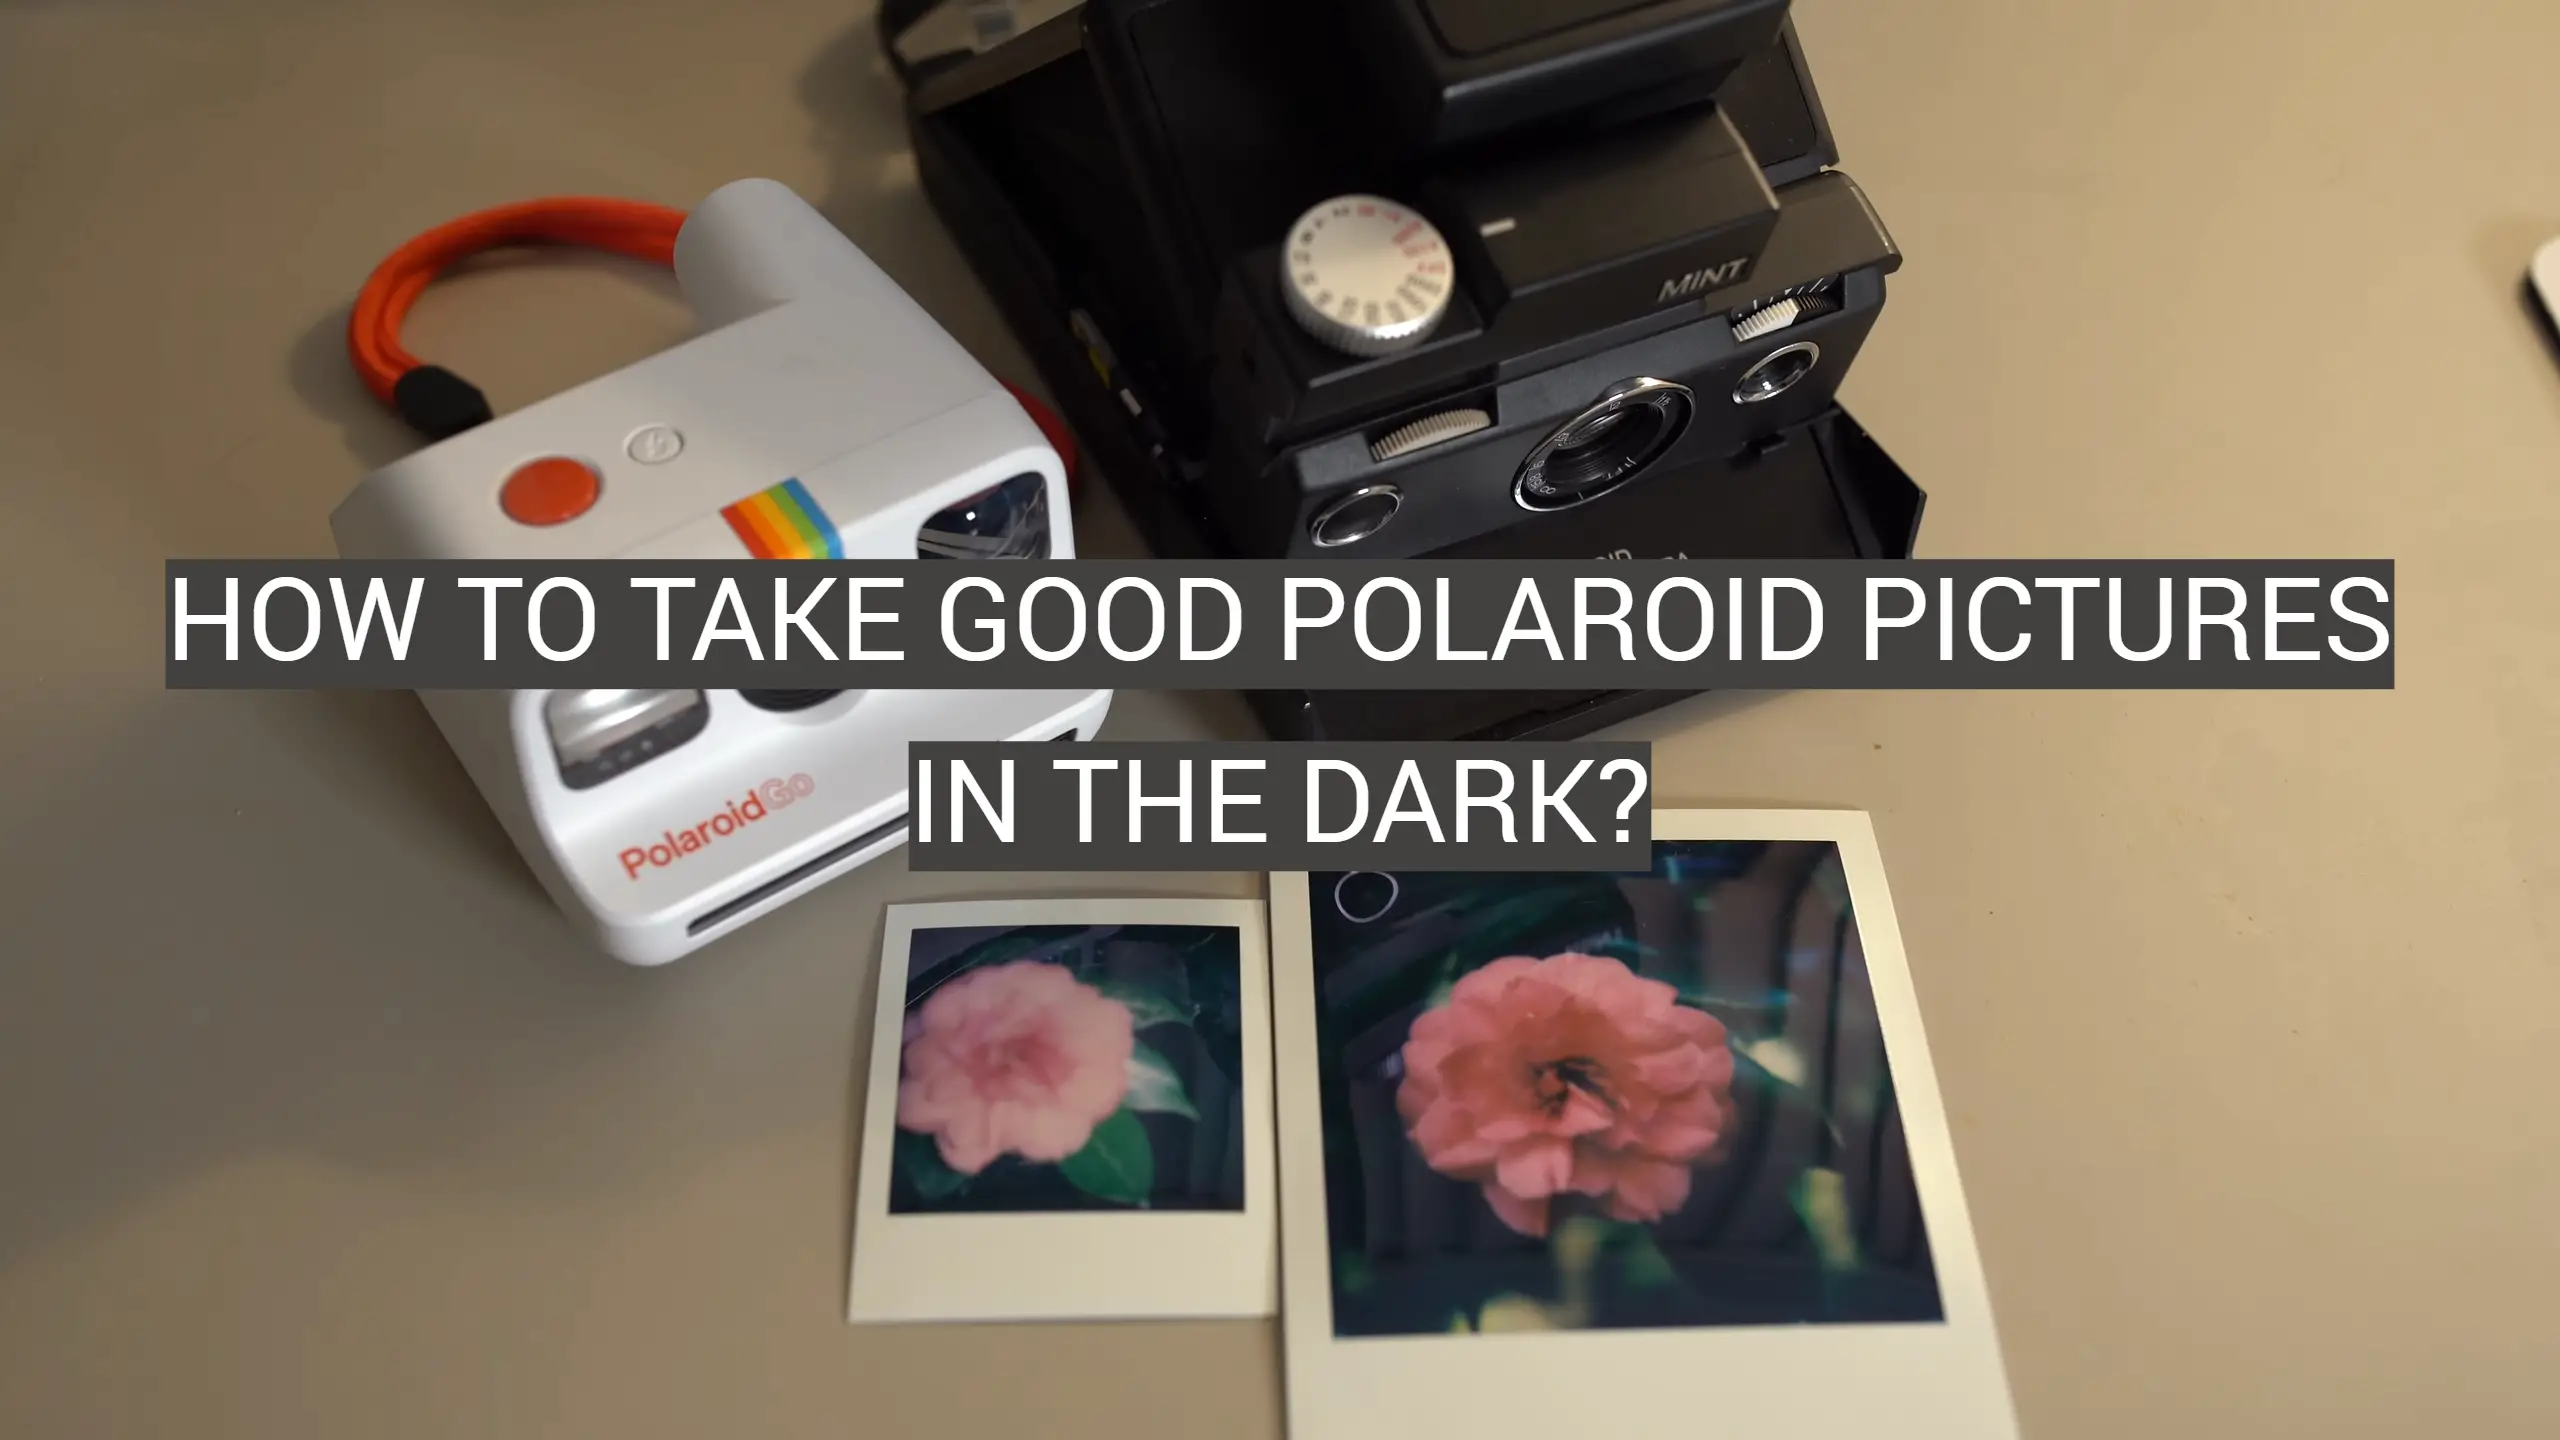 How to Take Good Polaroid Pictures in the Dark?